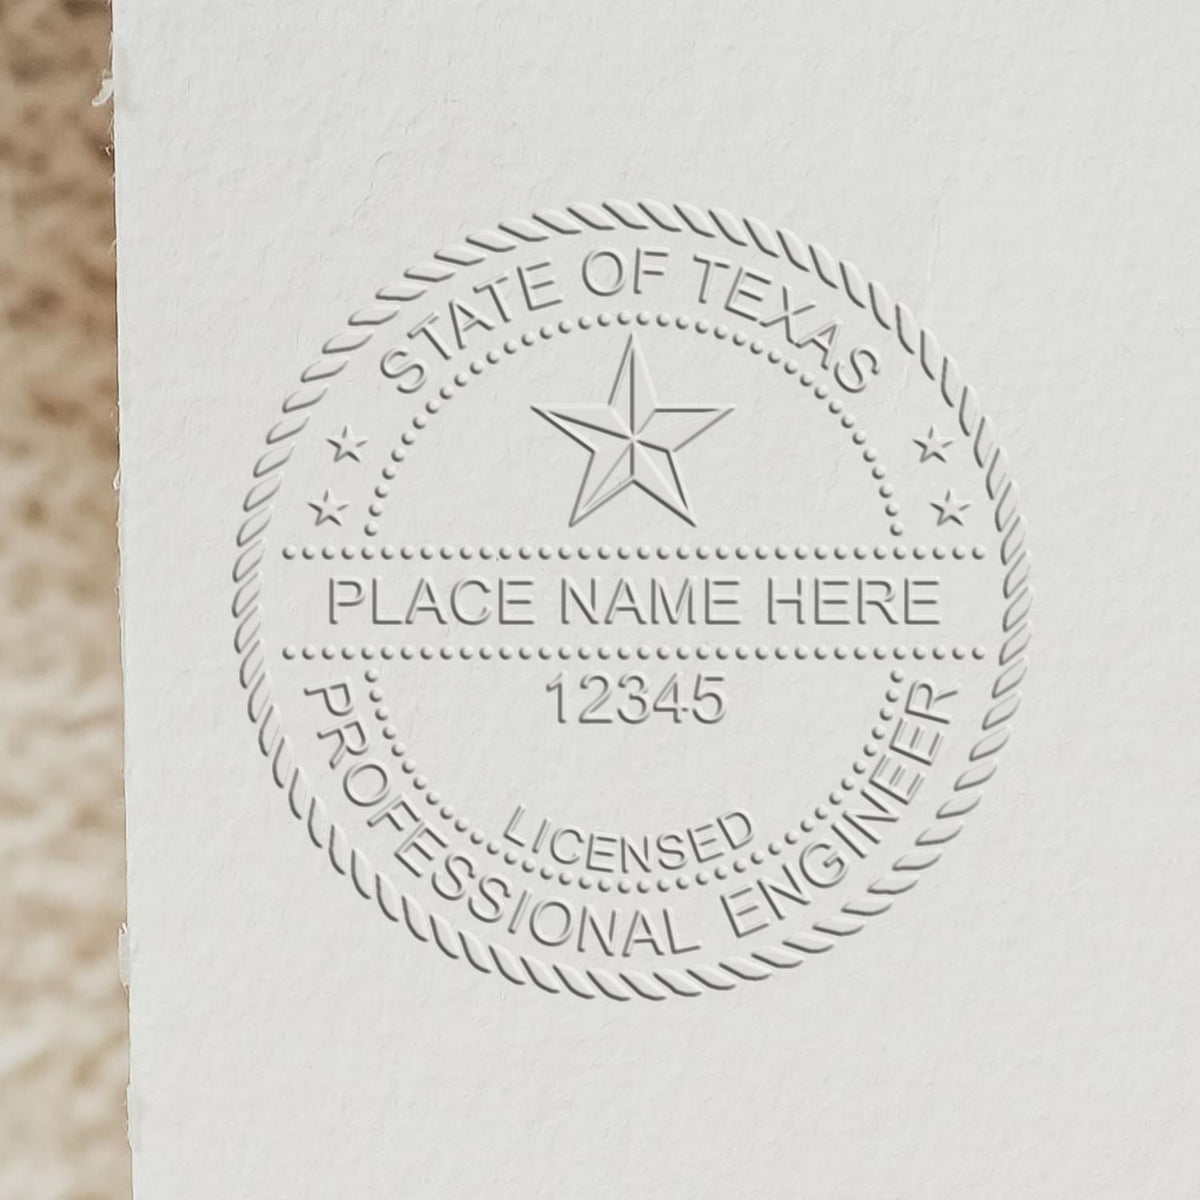 An alternative view of the State of Texas Extended Long Reach Engineer Seal stamped on a sheet of paper showing the image in use